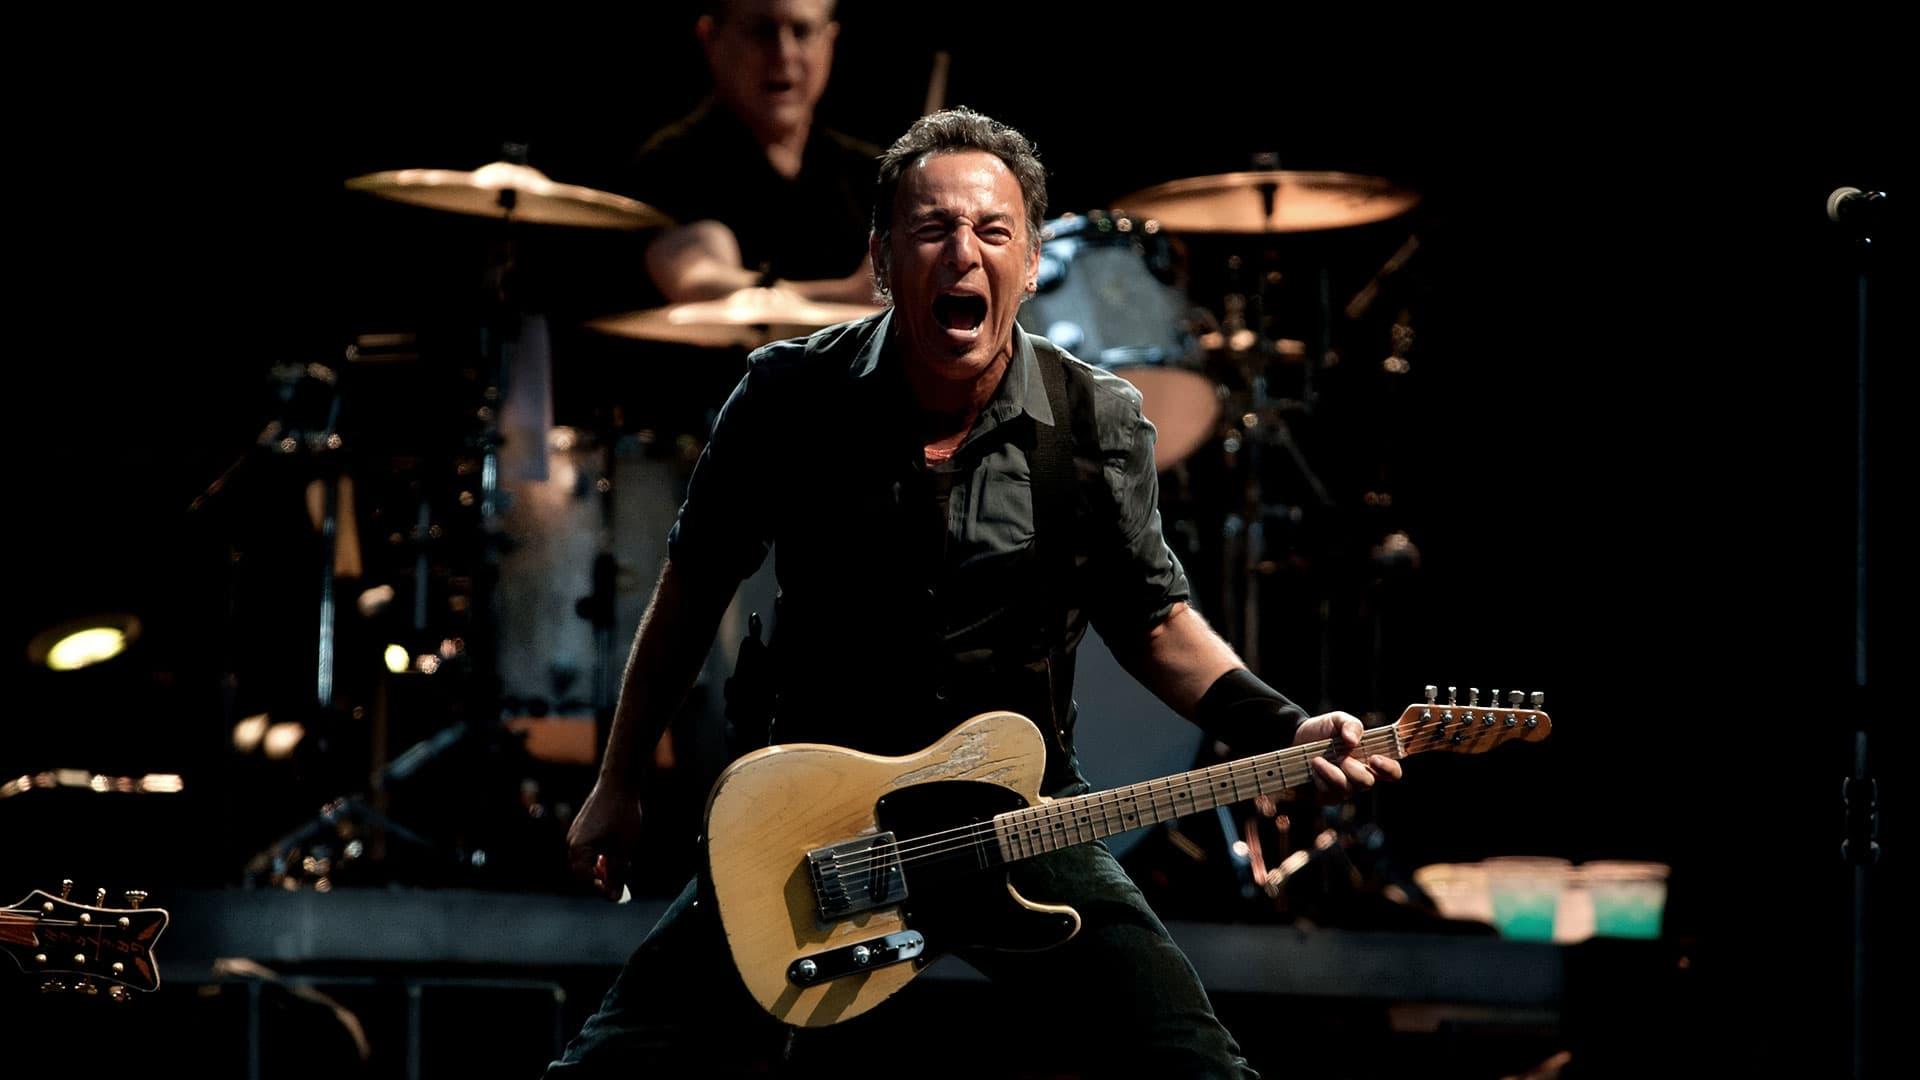 Bruce Springsteen & the E Street Band - Live in Barcelona backdrop